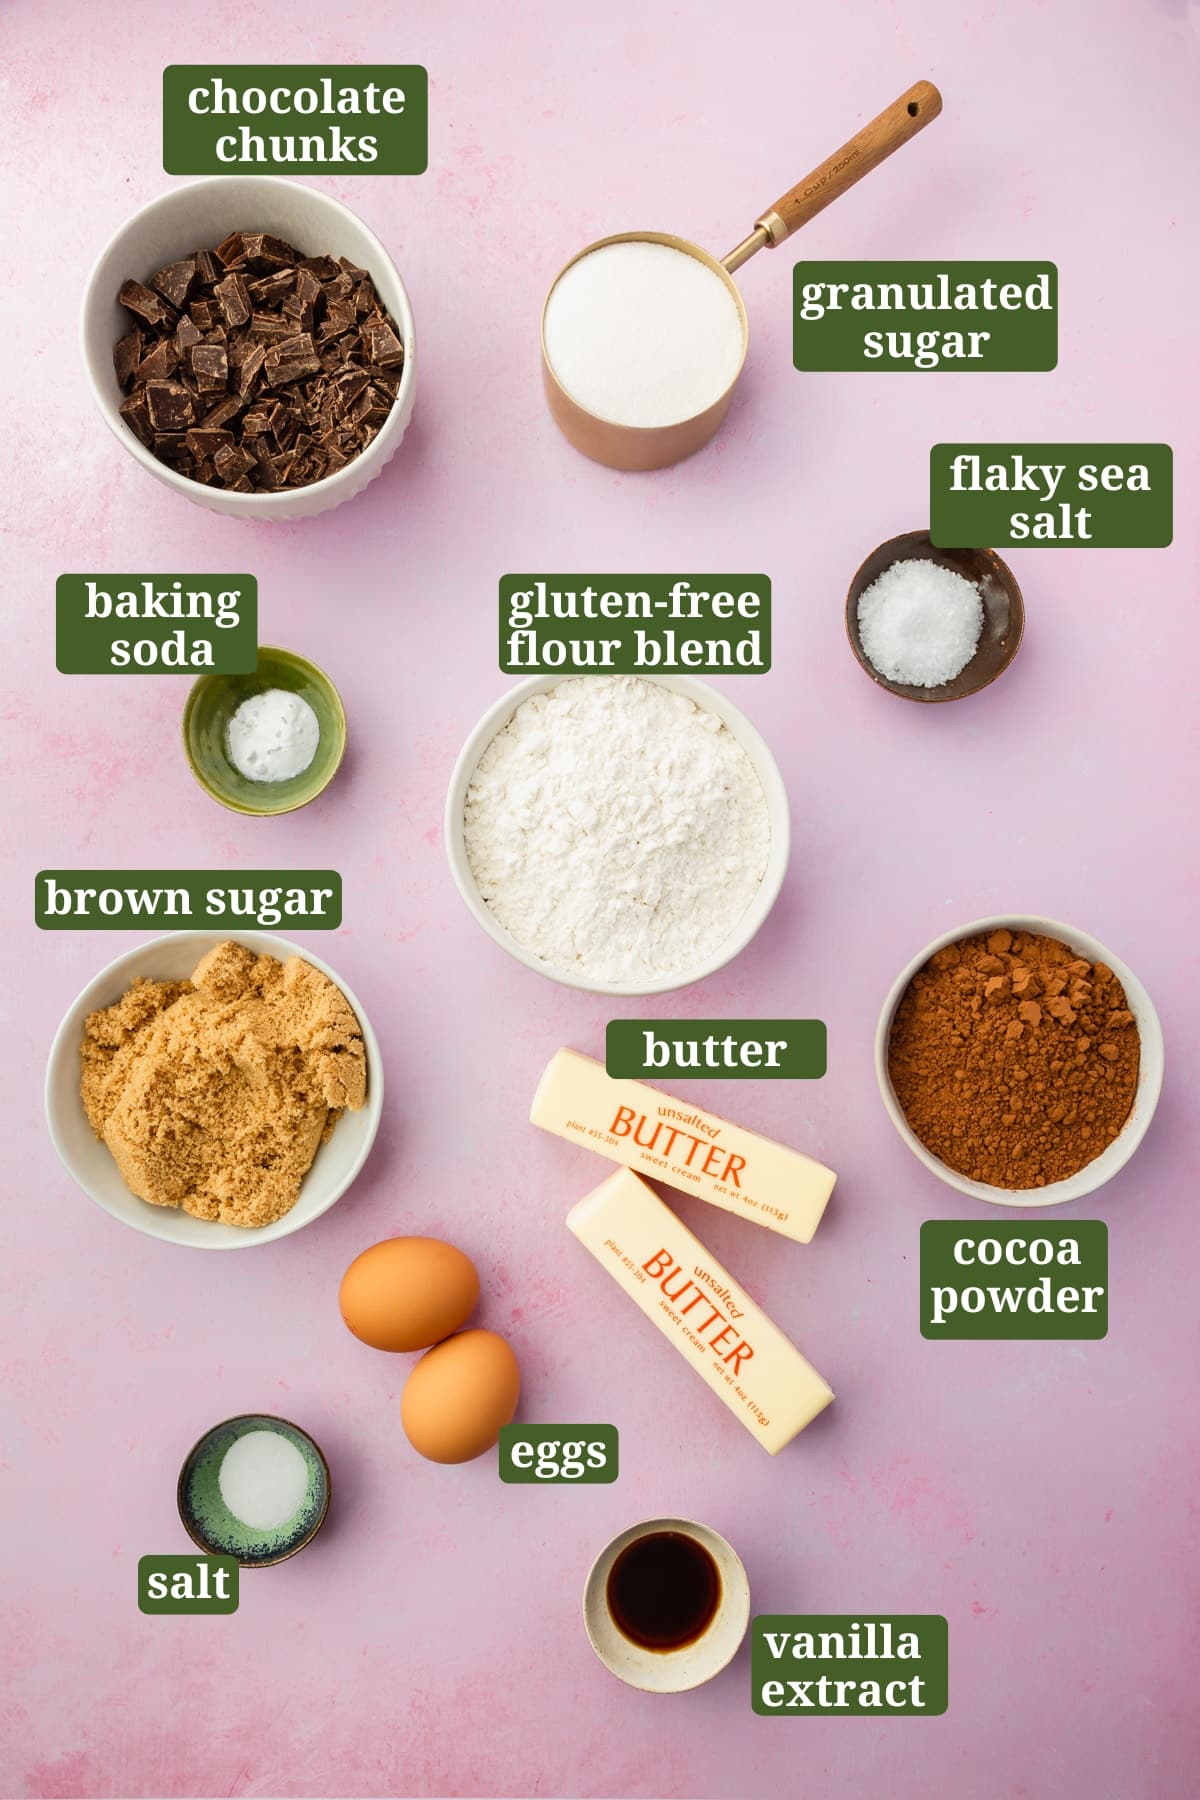 Small bowls of ingredients on a pink table to make gluten-free chocolate cookies, including chopped chocolate, gluten-free flour blend, cocoa powder, brown sugar, granulated sugar, butter, eggs, vanilla, baking soda, and salt with text overlays over each ingredient.